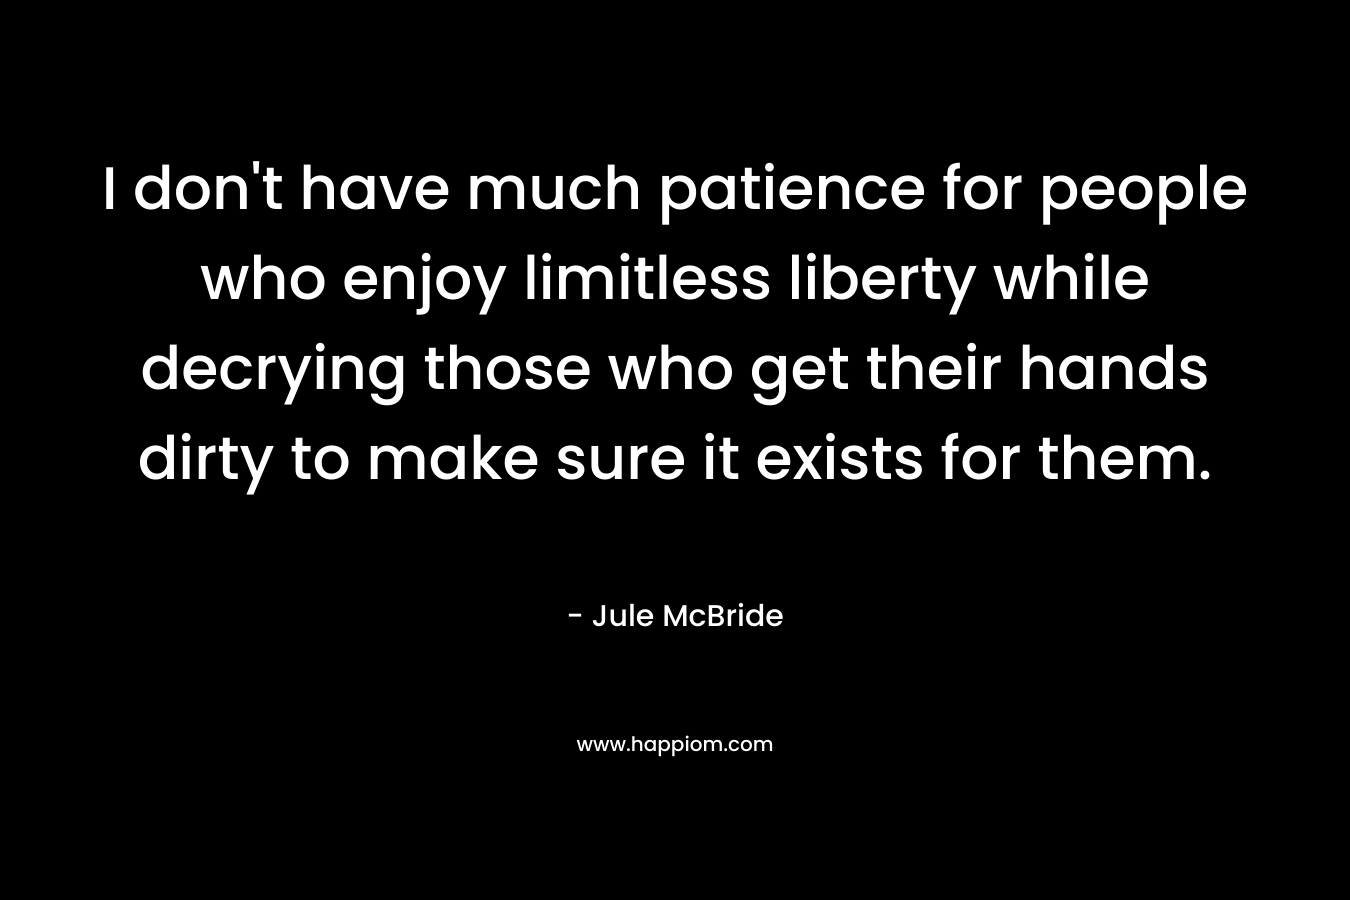 I don't have much patience for people who enjoy limitless liberty while decrying those who get their hands dirty to make sure it exists for them.